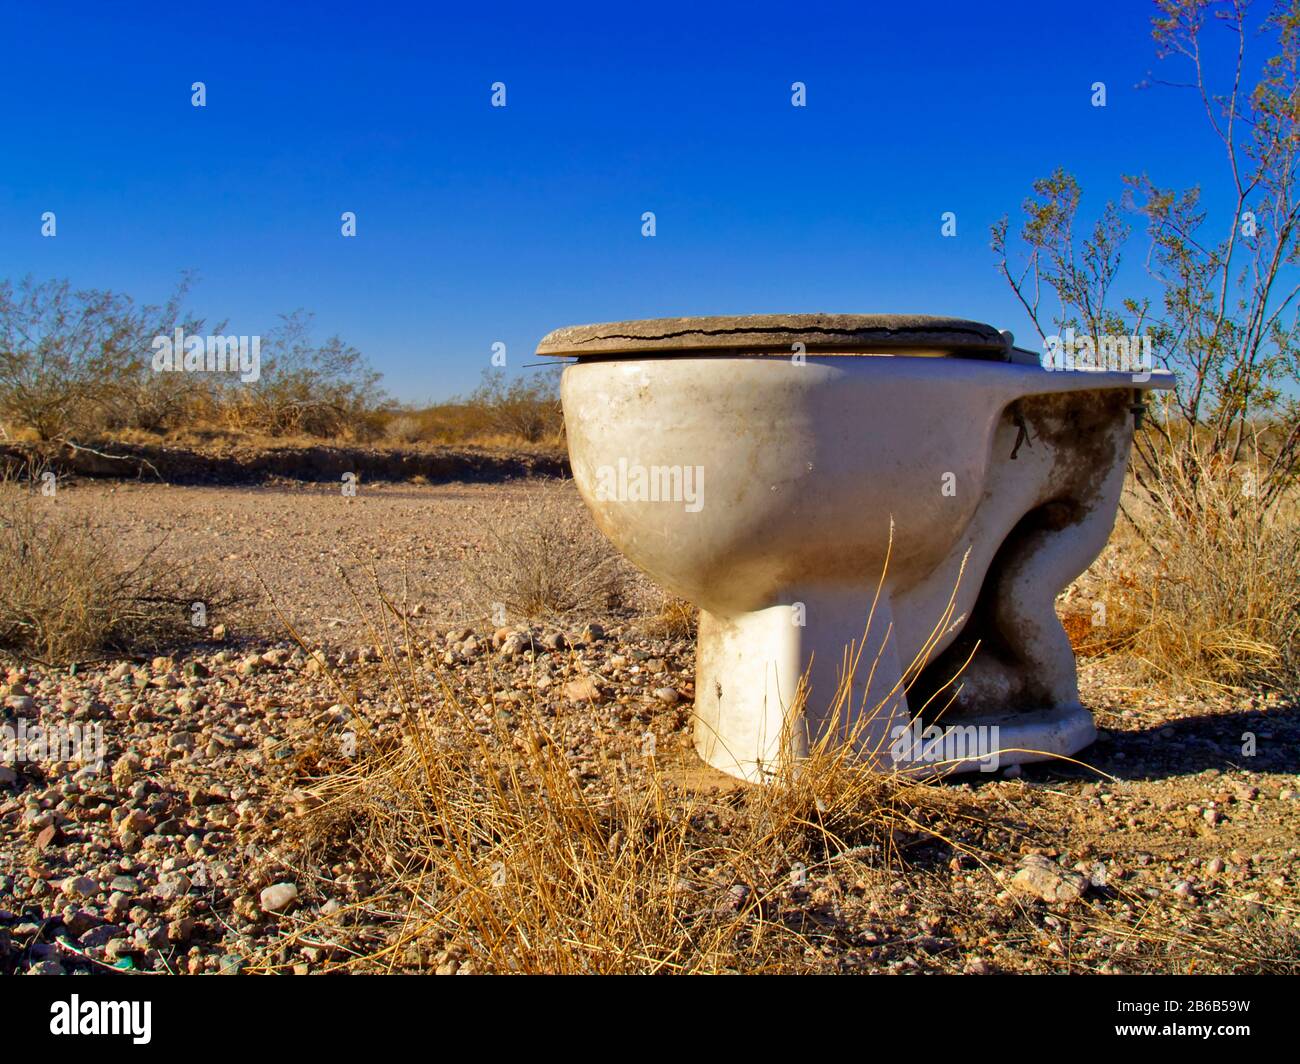 An old toilet abandoned in a remote area of the Arizona Desert. Stock Photo